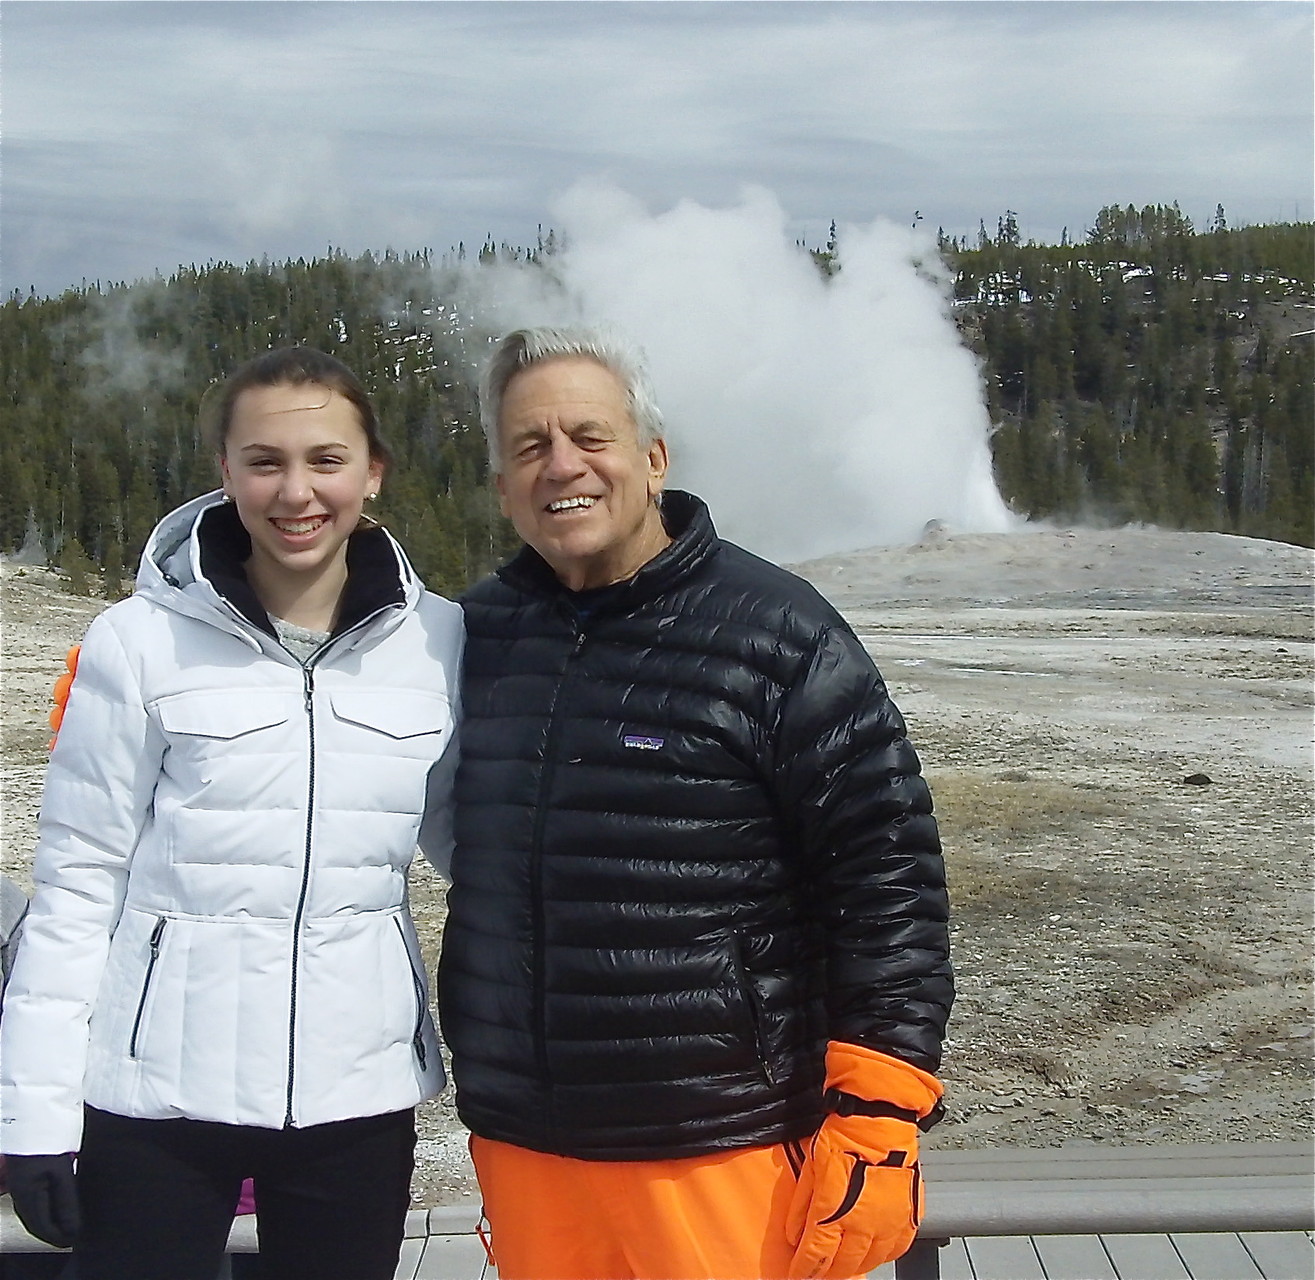 Gabby and Stuart Sr. in front of Old Faithful geyser